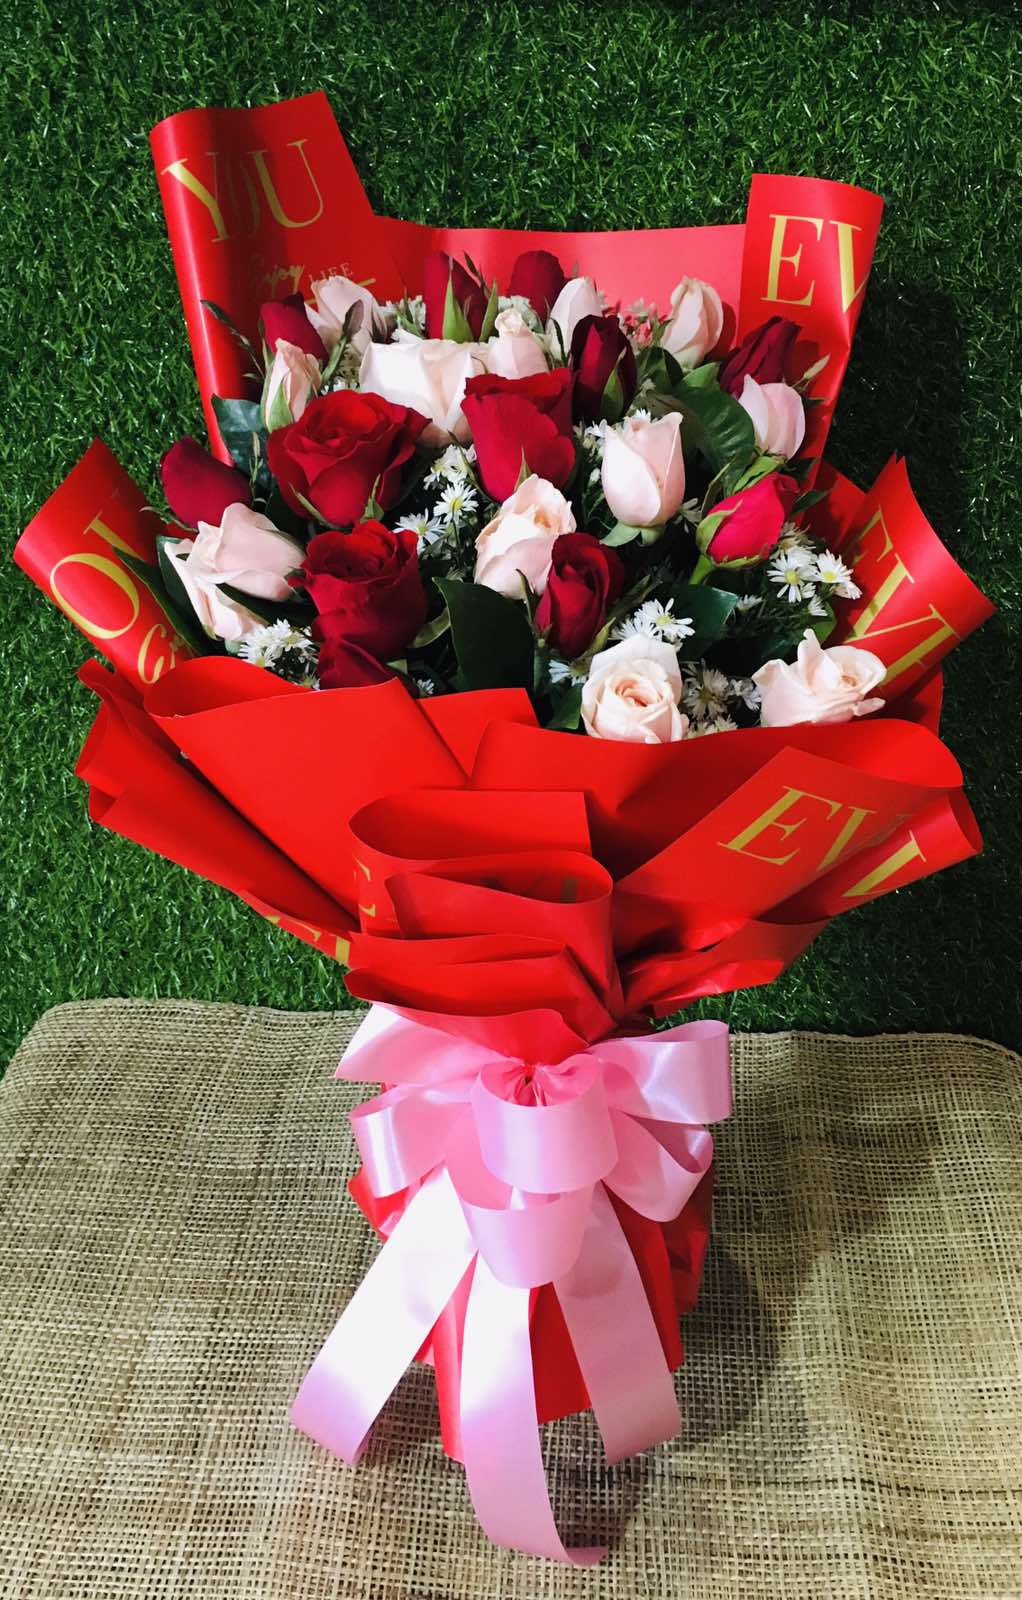 Order 24 Red Roses in Bouquet with Happy Birthday Mylar Balloon to Manila